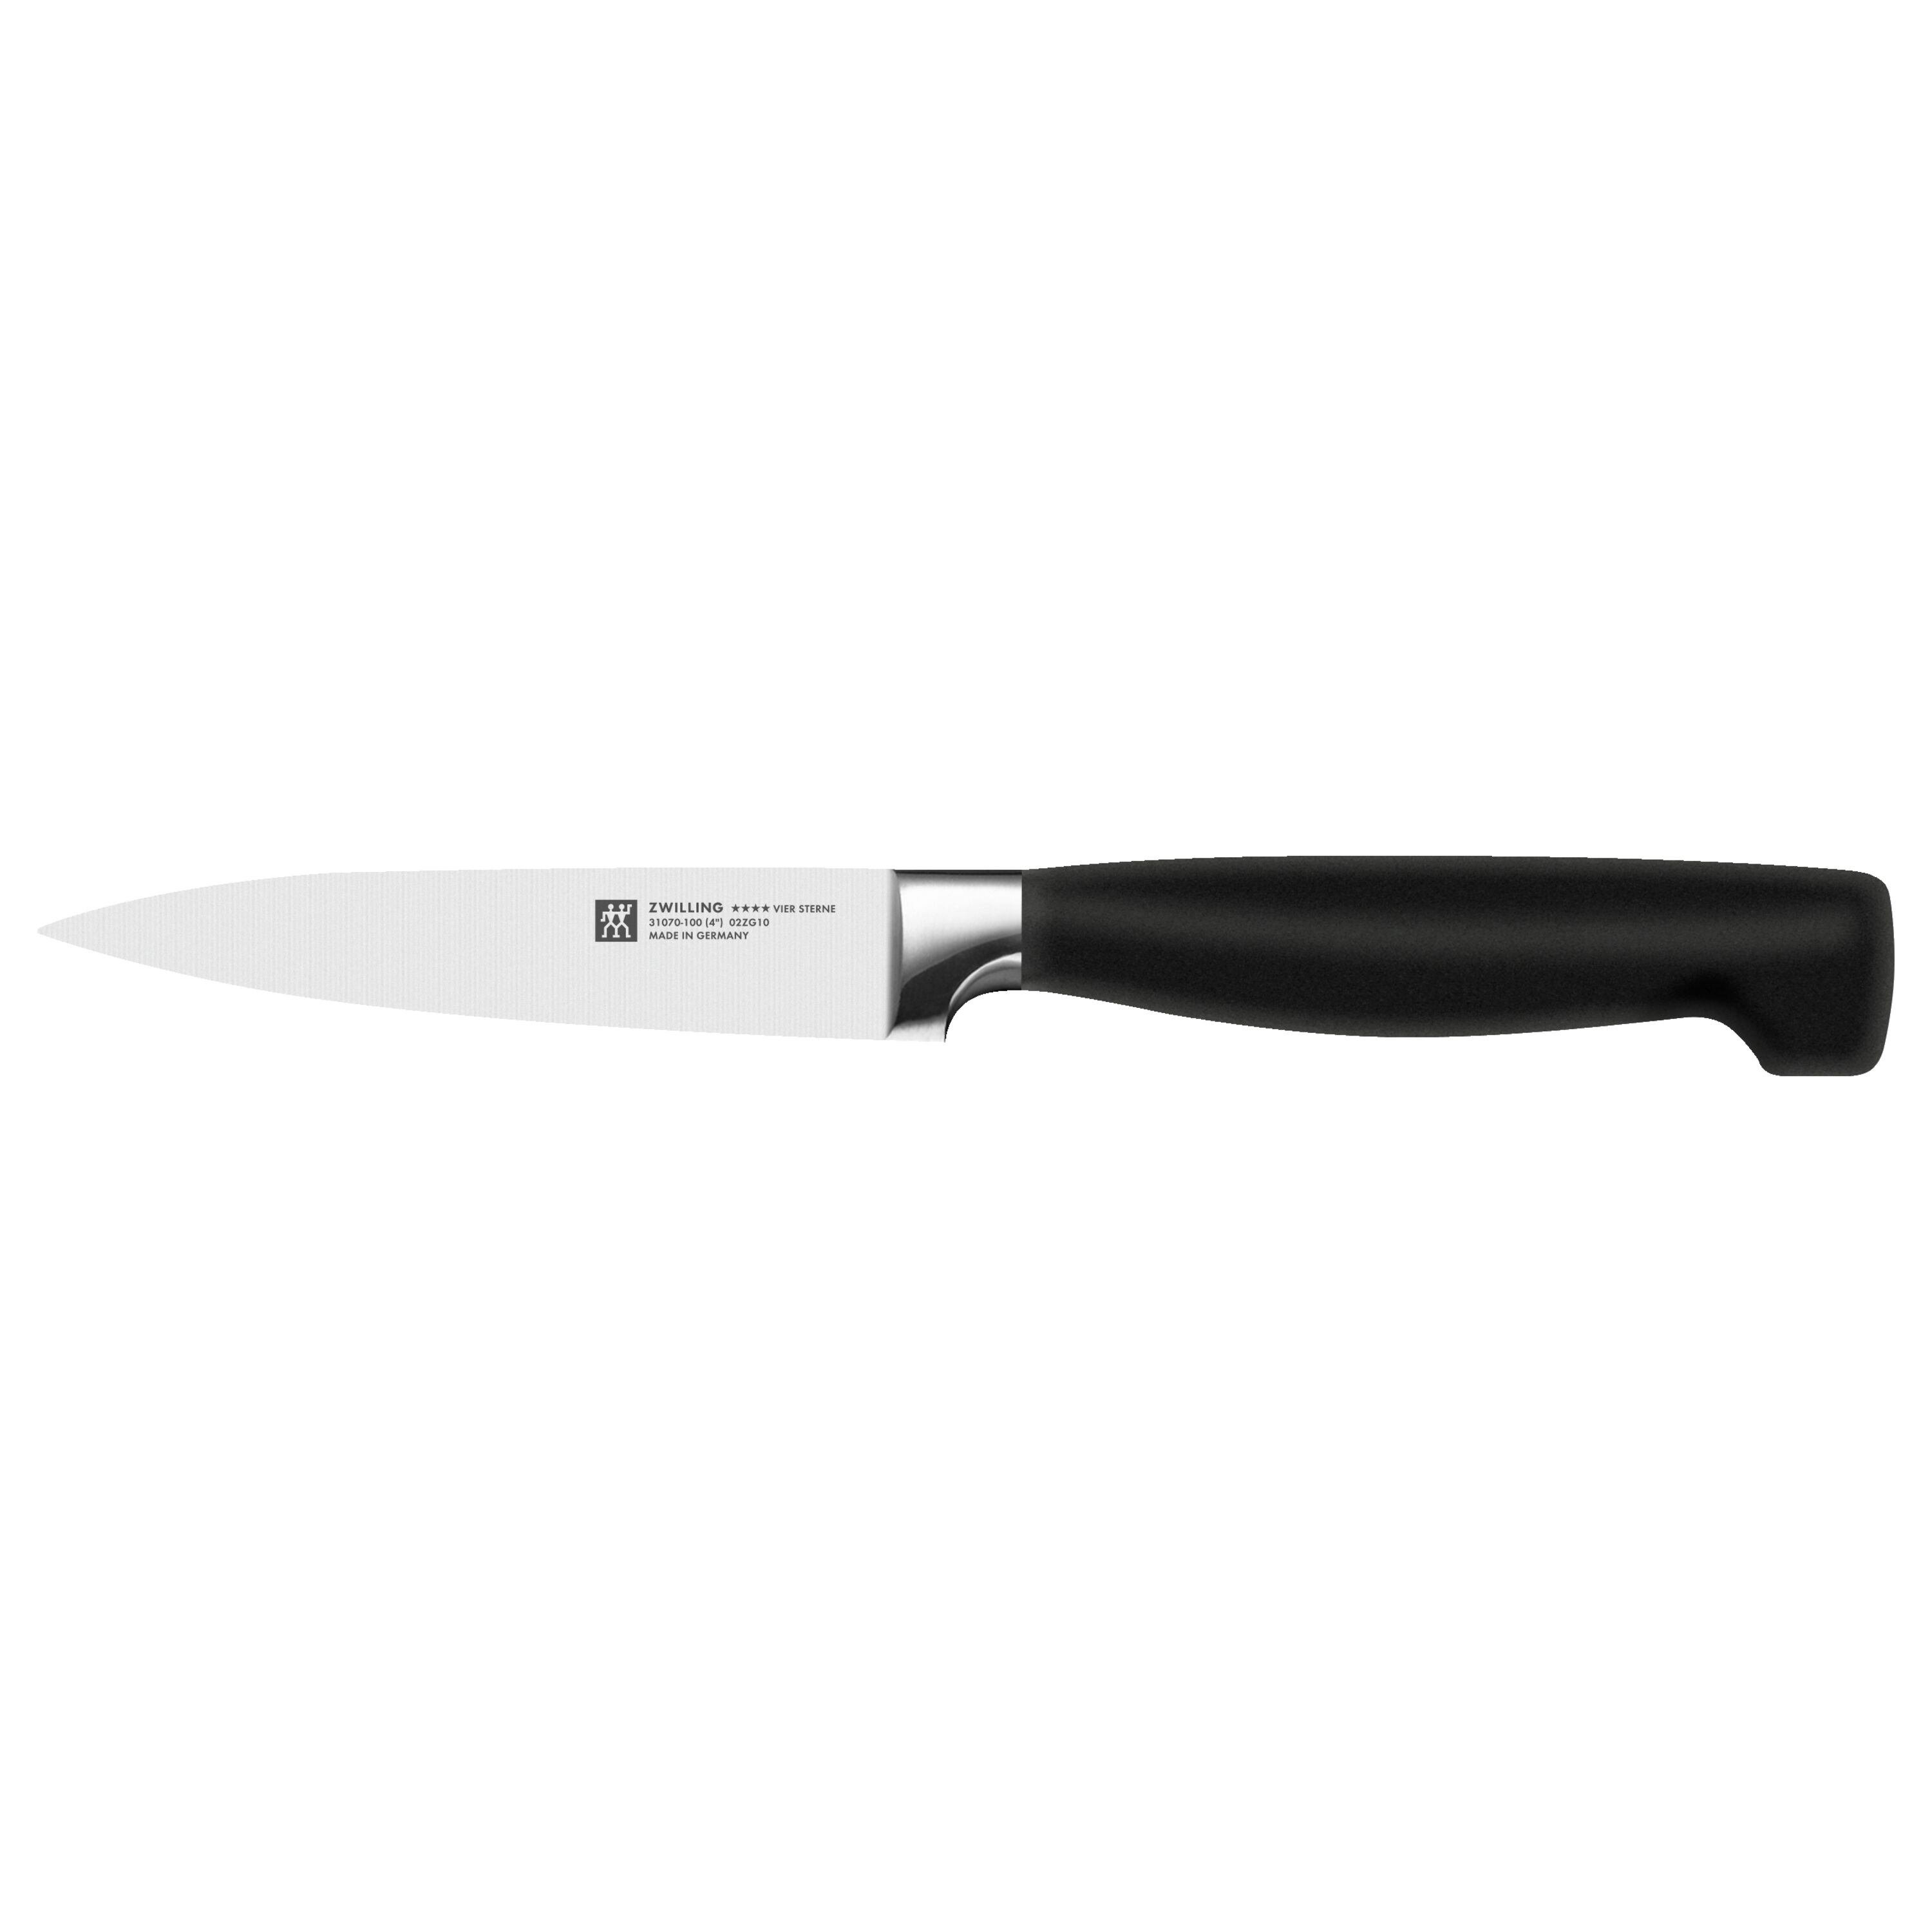 Paring knife, 4 inch, carbon steel